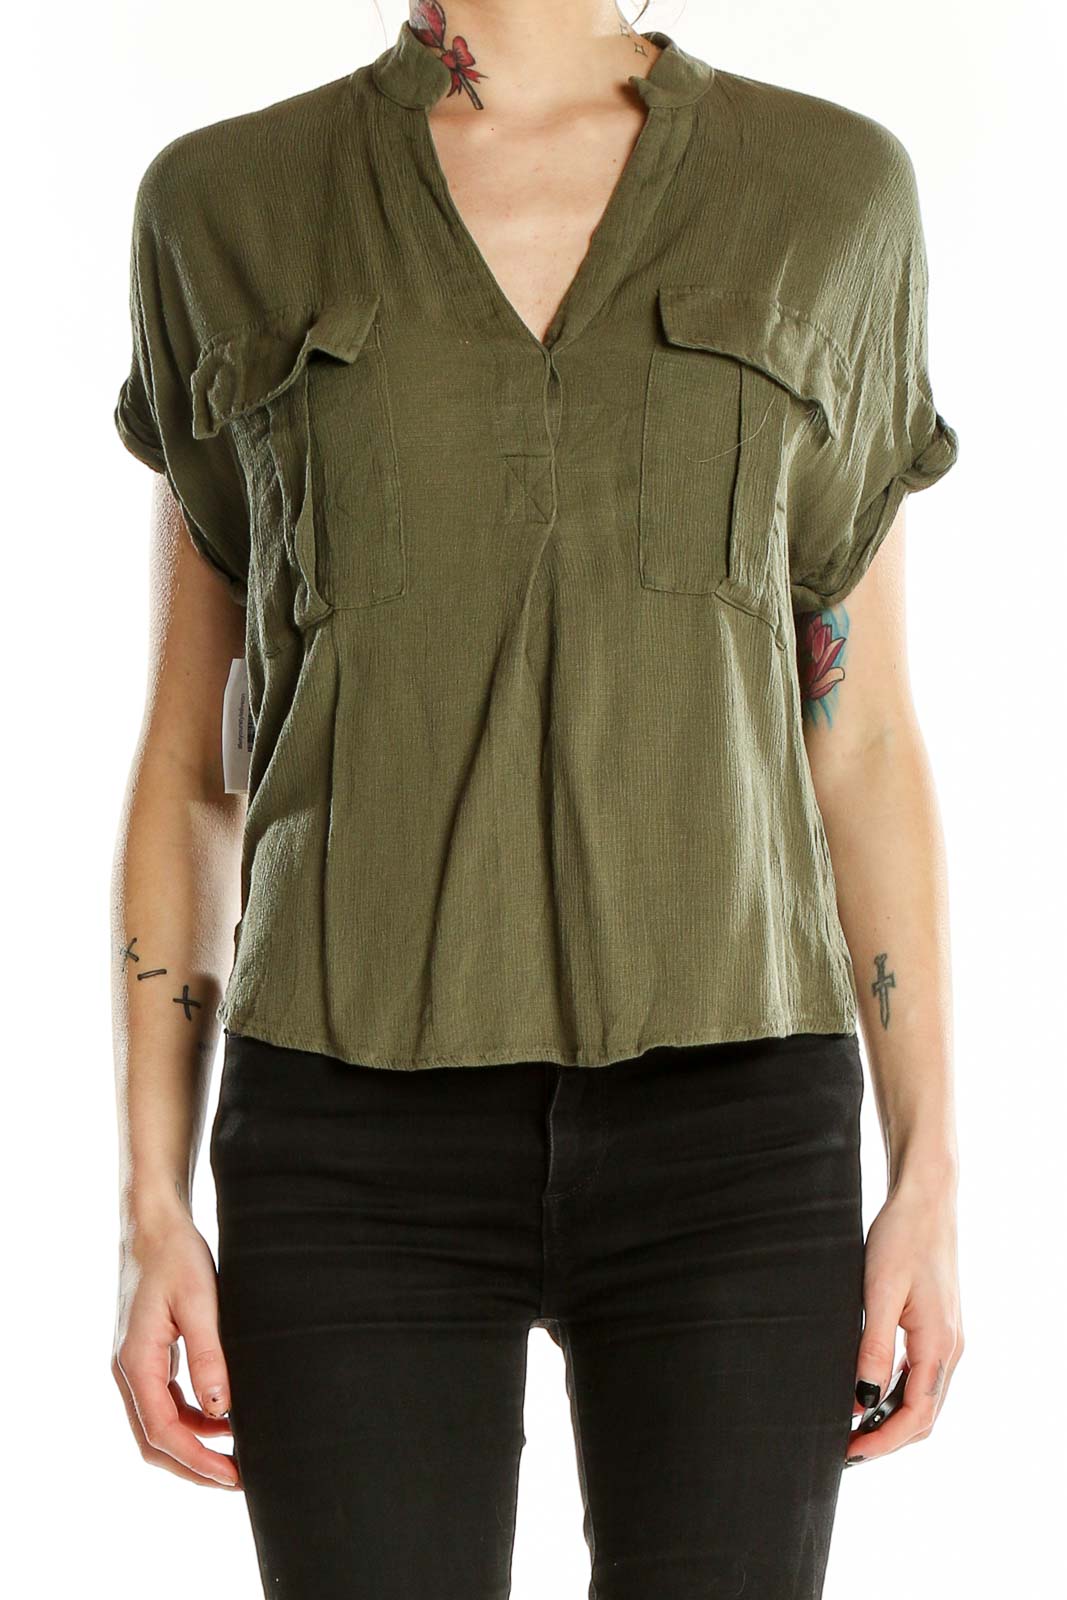 Green Shorts Sleeve Top Front